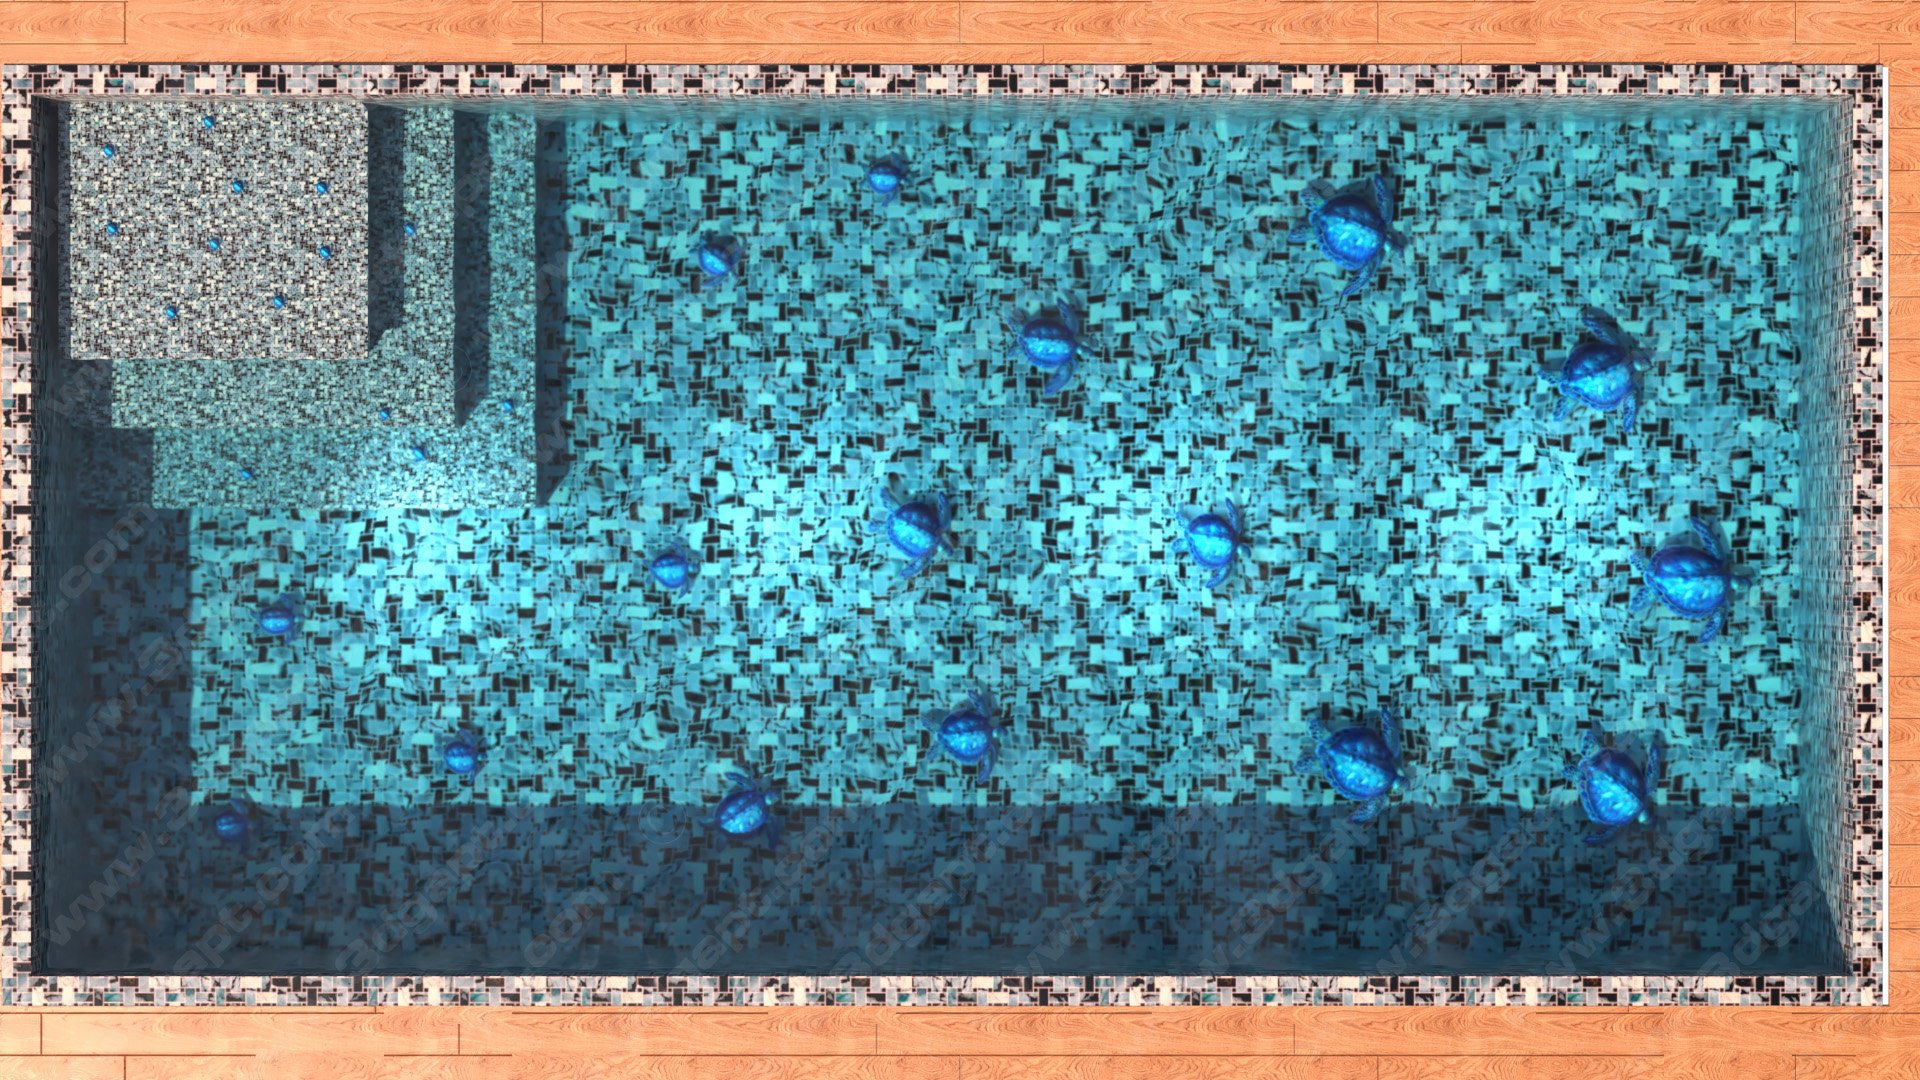 Pool with 3d turtles on the floor - Alternative version 18